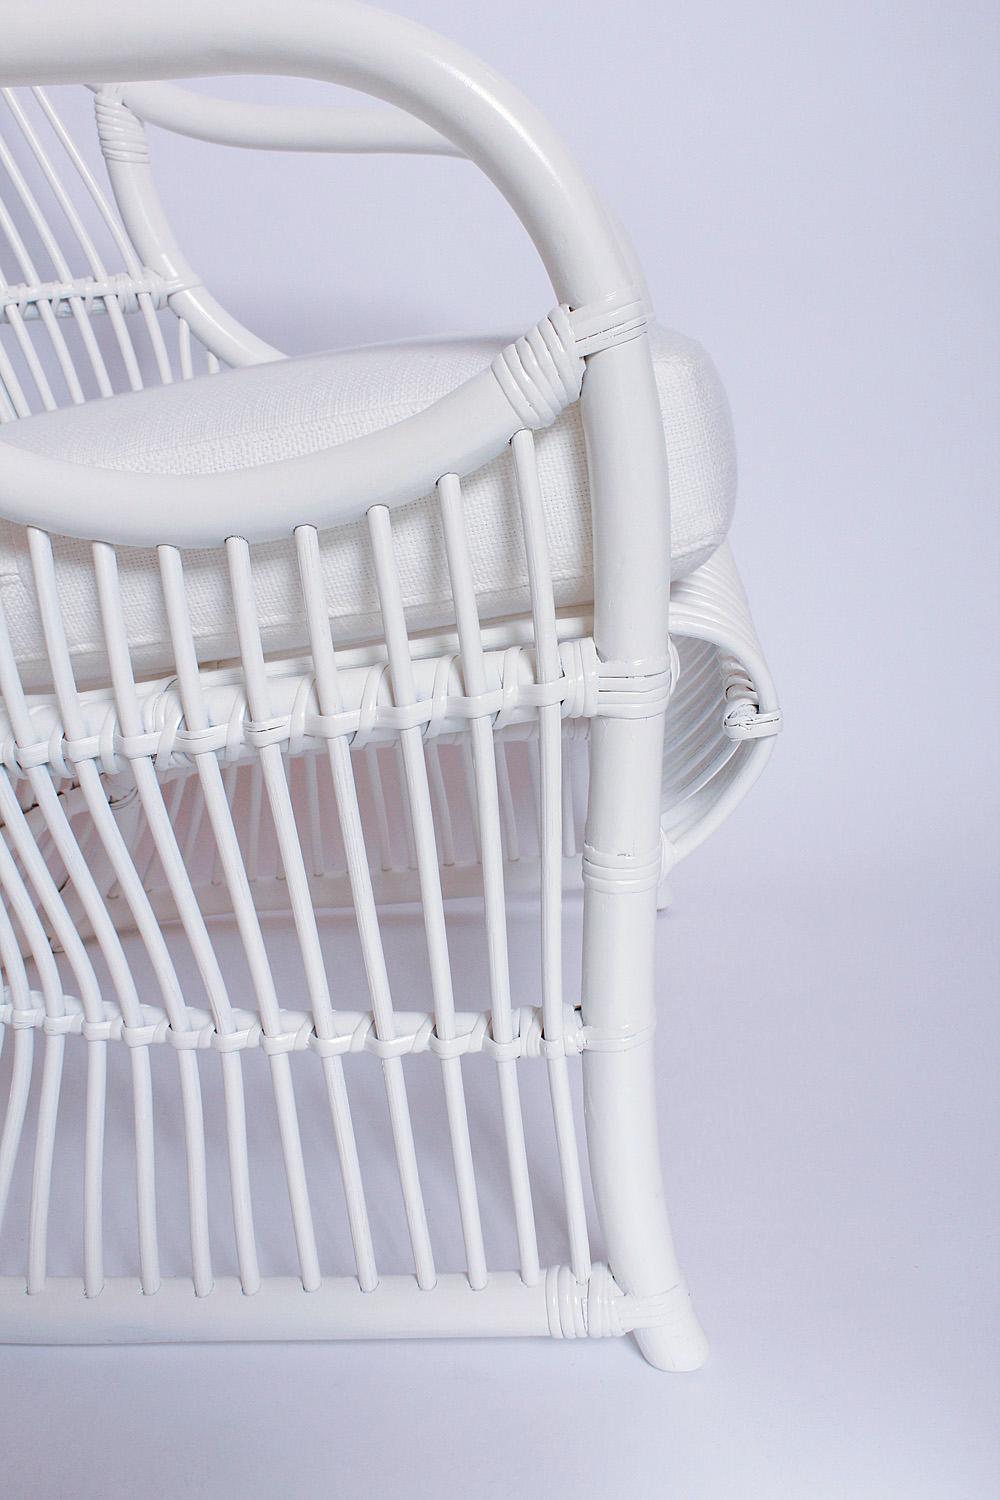 Painted White Bamboo and Rattan Canopy Chair by Henry Olko for Willow and Reed